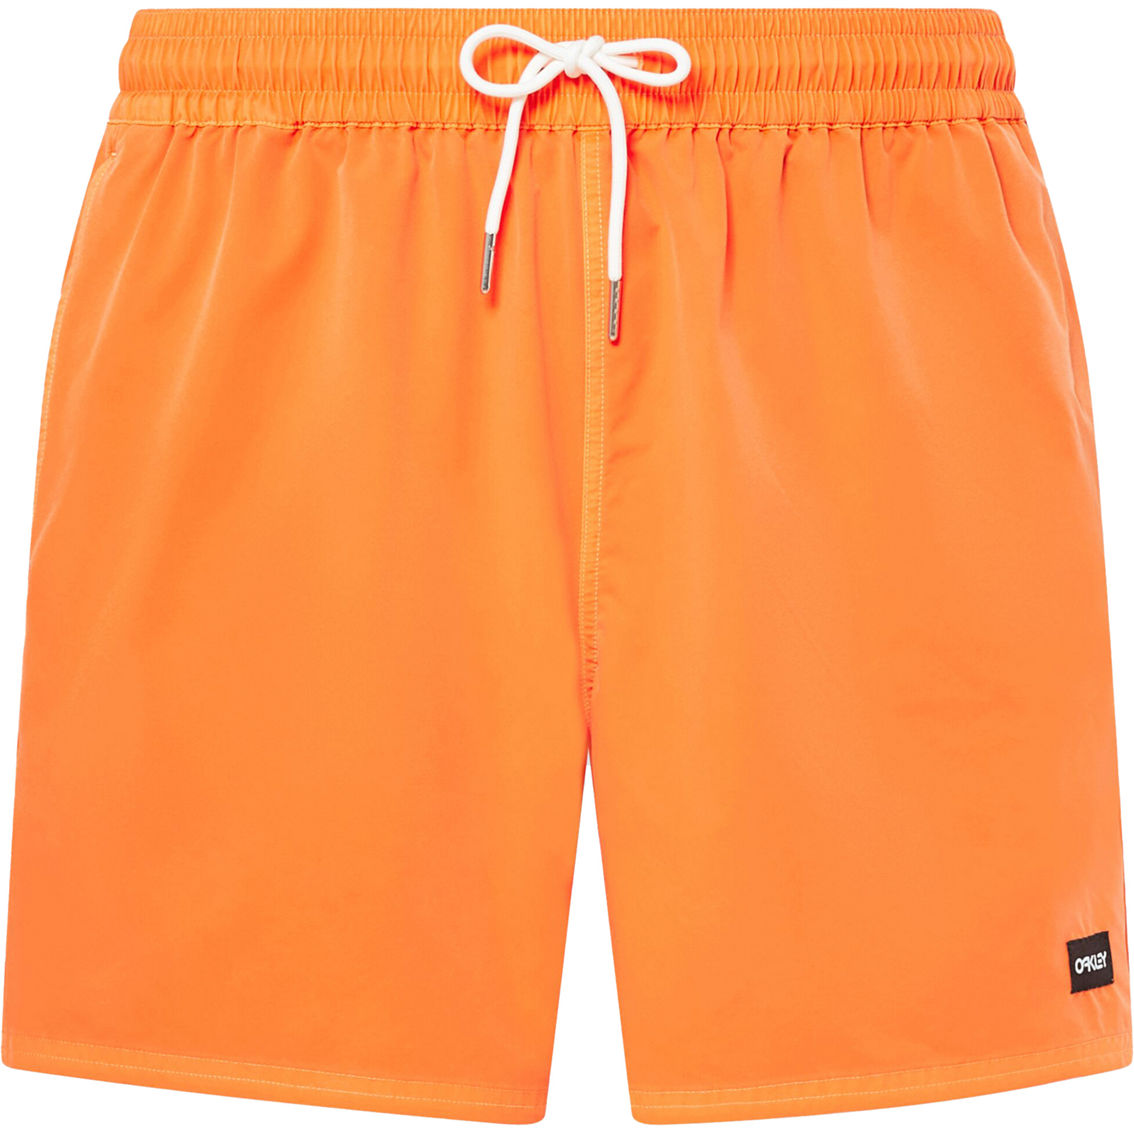 Oakley Robinson RC 16 in. Beachshorts - Image 4 of 4